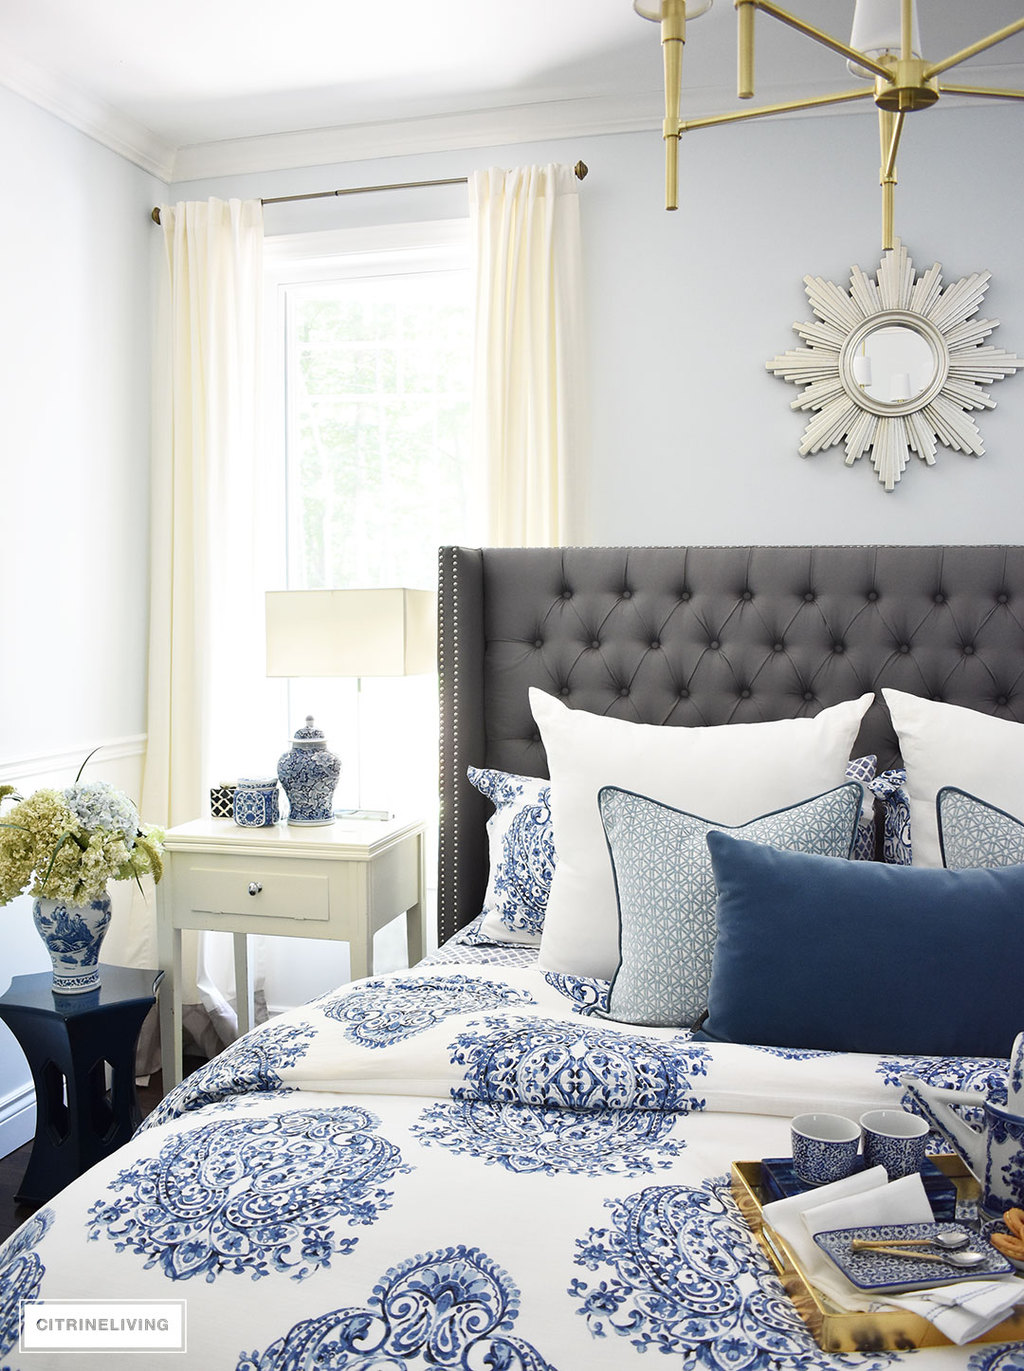 A sunburst mirror is a chic and classic addition to any space! This beautiful blue and white bedroom accented with a mix of cool and warm metals is elegant, warm and inviting. A metallic sunburst mirror as the perfect finishing touch.